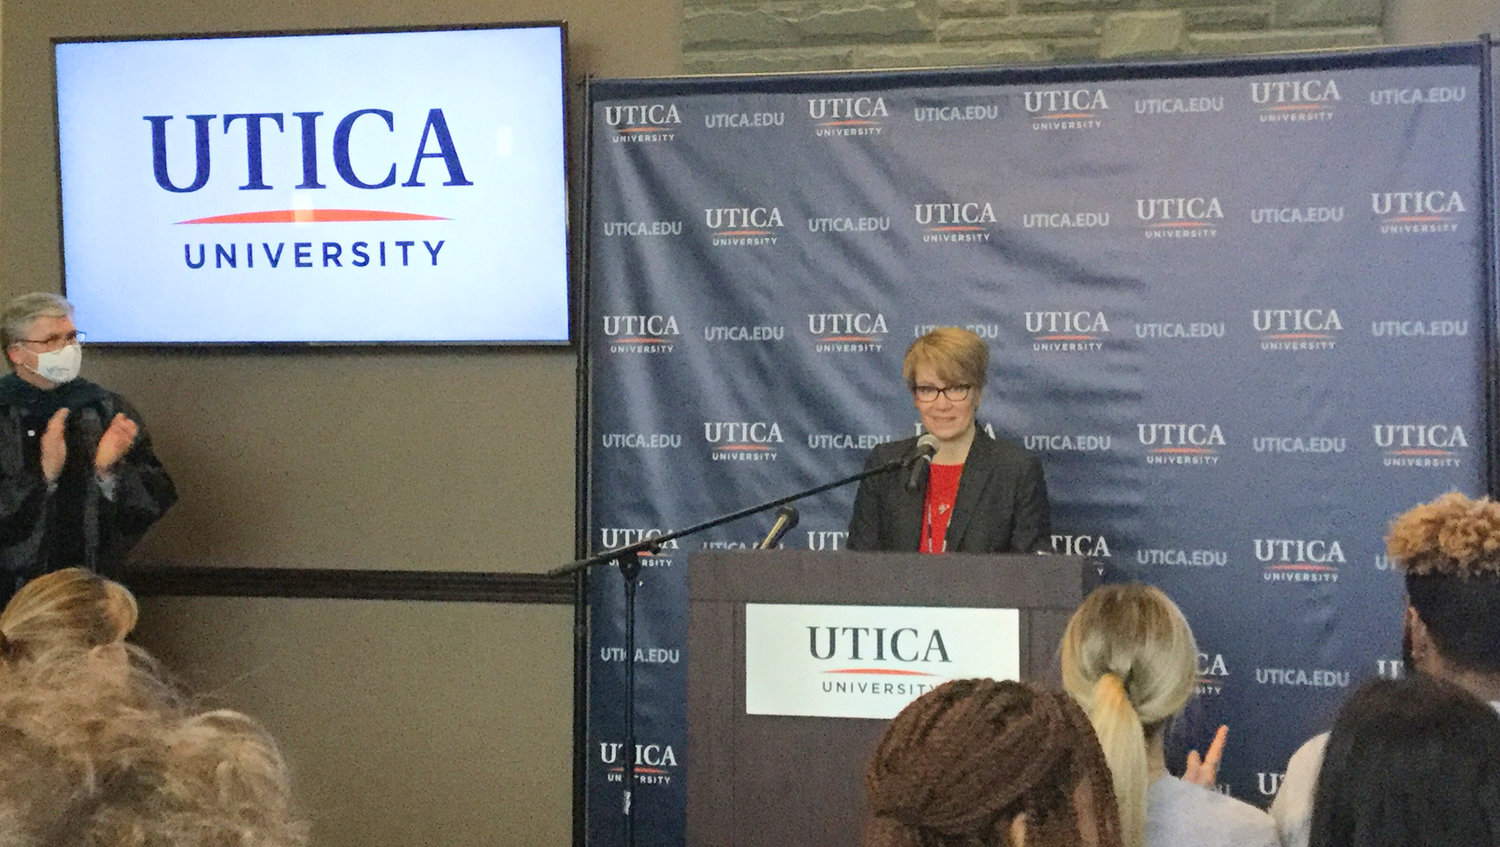 UTICA UNIVERSITY — Dr. Laura Casamento, president of Utica University, made the official announcement of the name change on campus Thursday morning. Casamento said there would not be a rise in tuition, and the new name would help with both recruitment and with graduates entering the workforce.